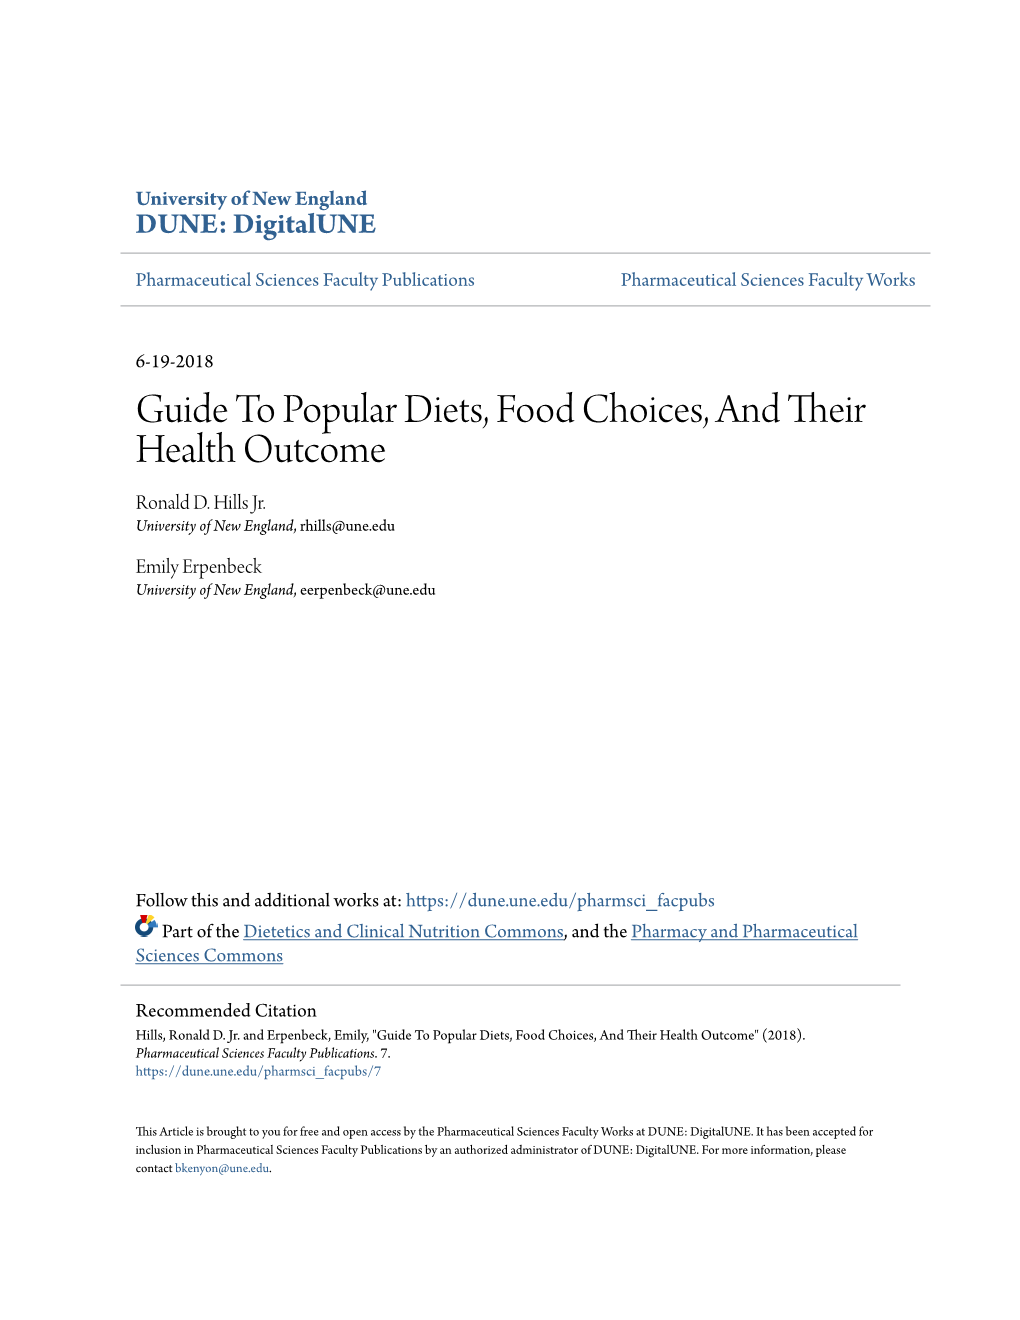 Guide to Popular Diets, Food Choices, and Their Health Outcome Ronald D